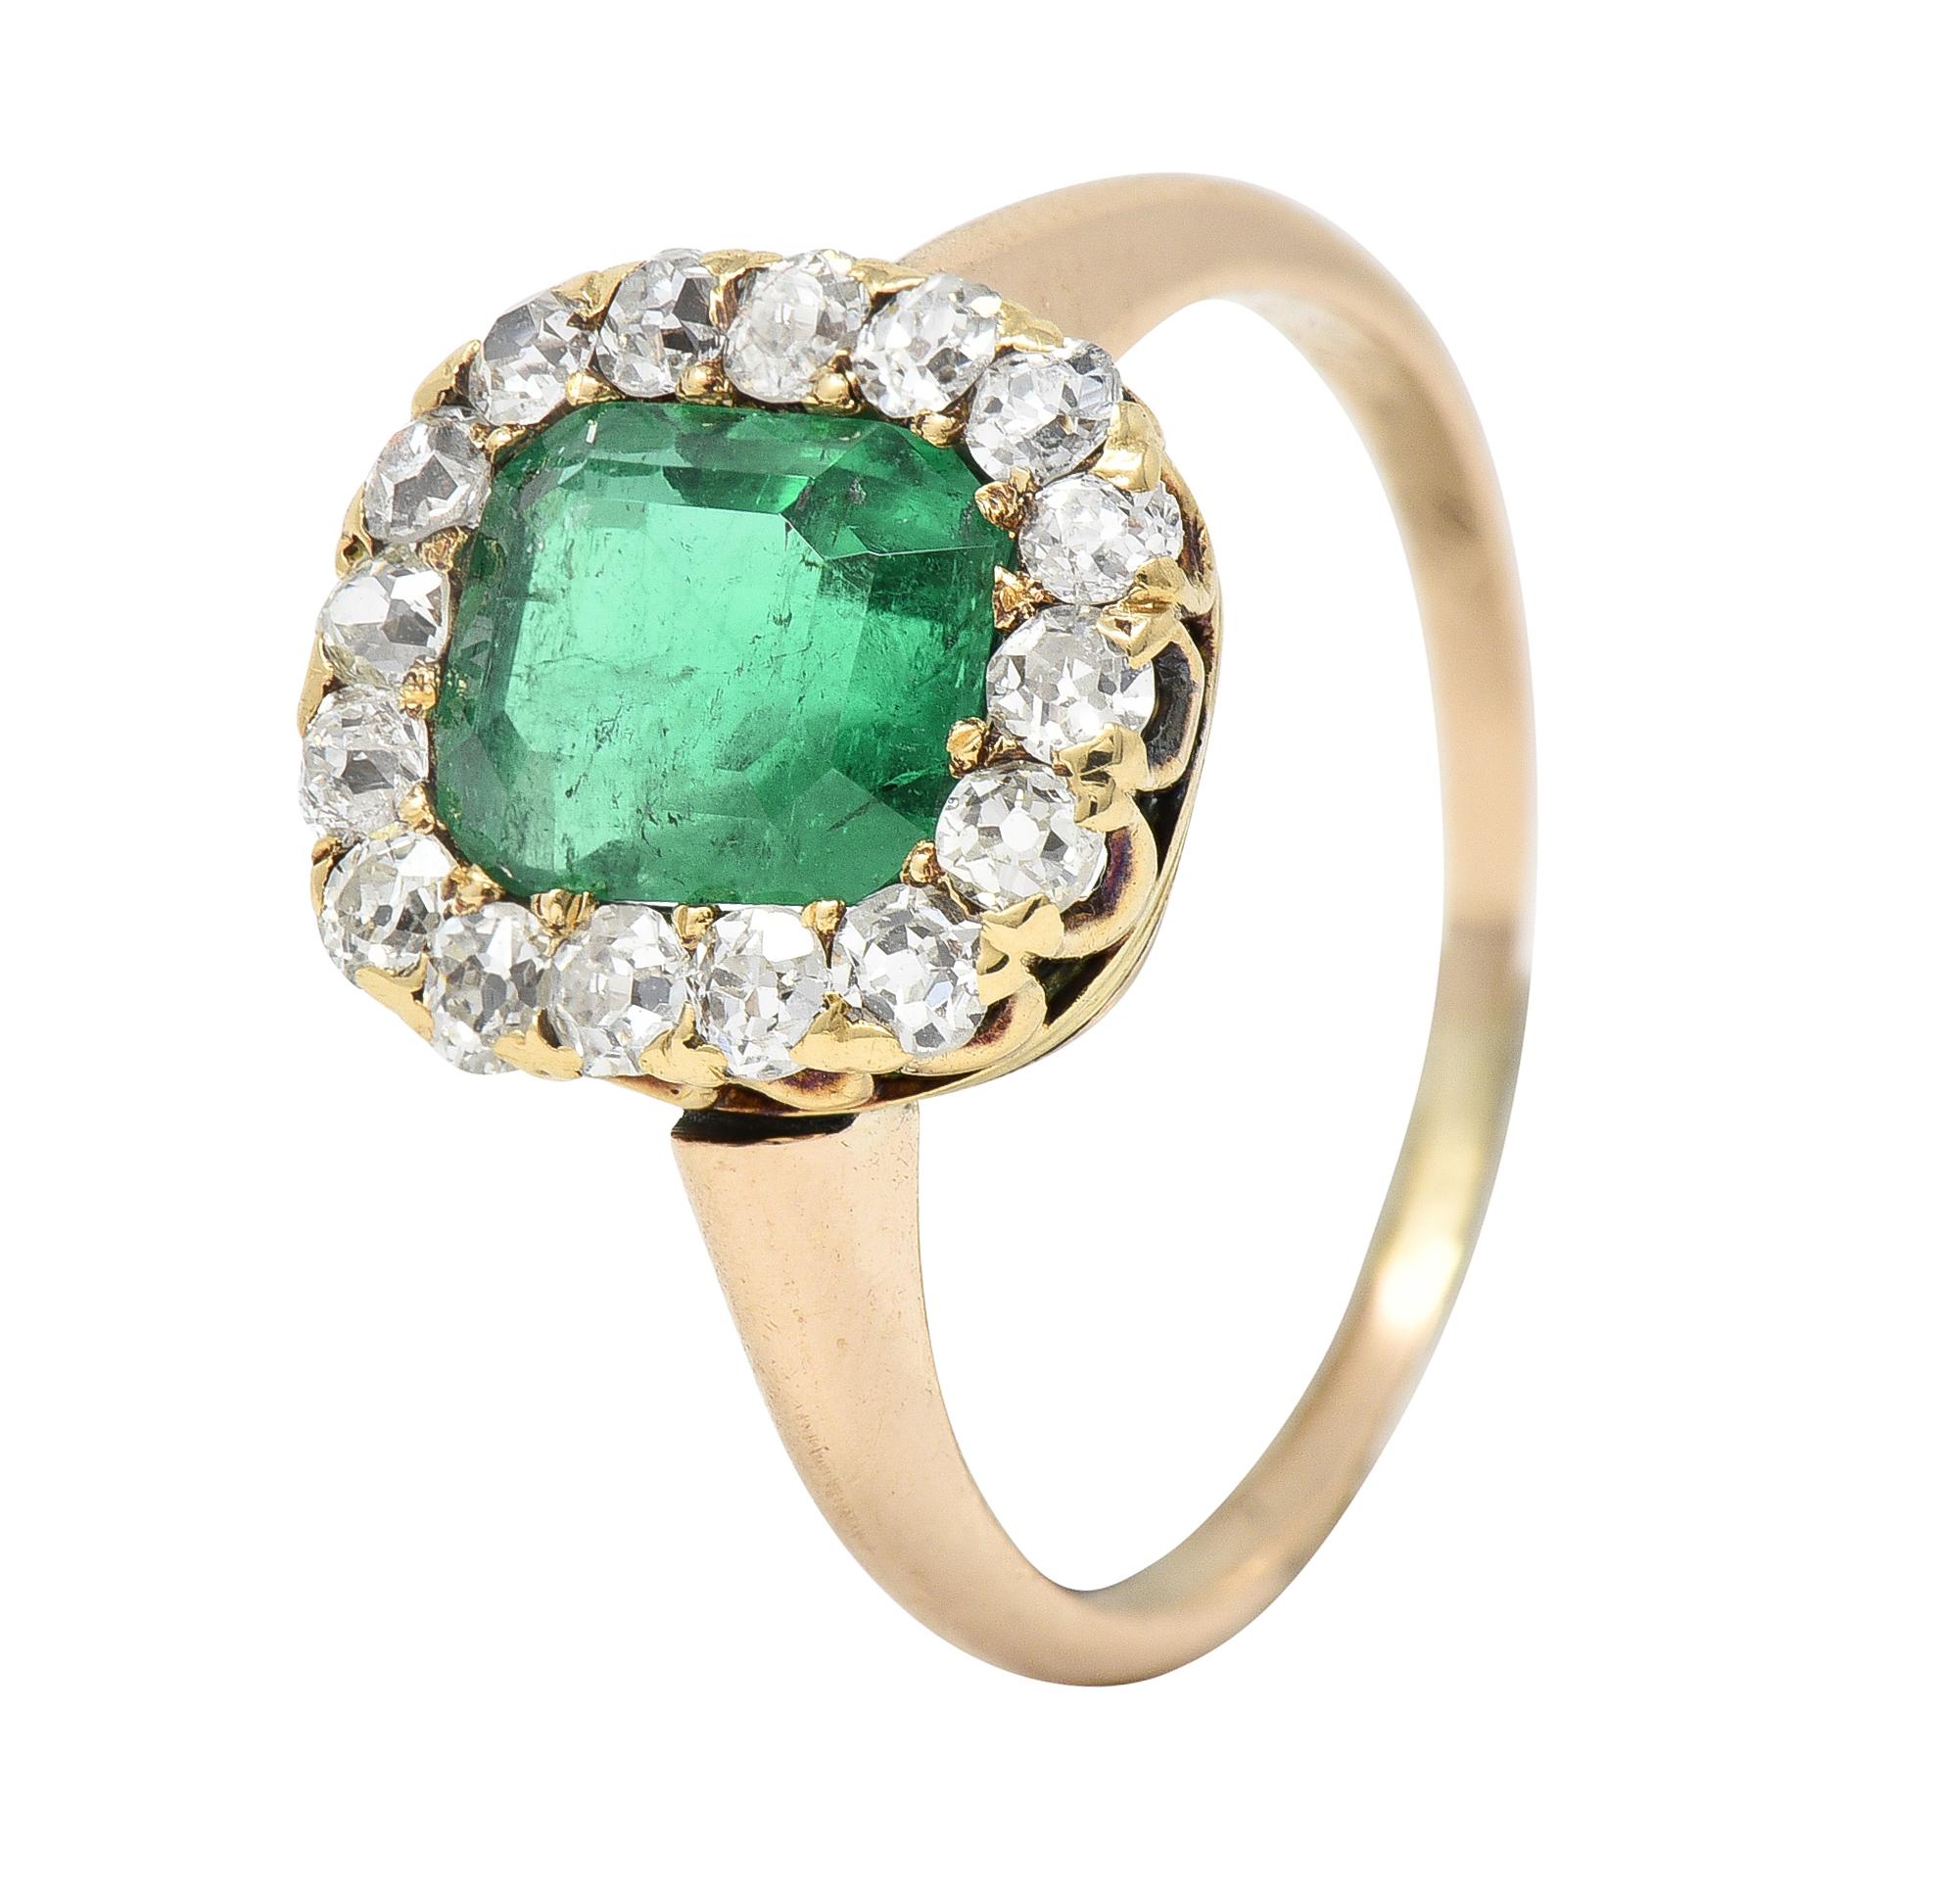 Victorian 2.51 CTW Colombian Emerald Diamond 14 Karat Yellow Gold Halo Ring GIA For Sale 3